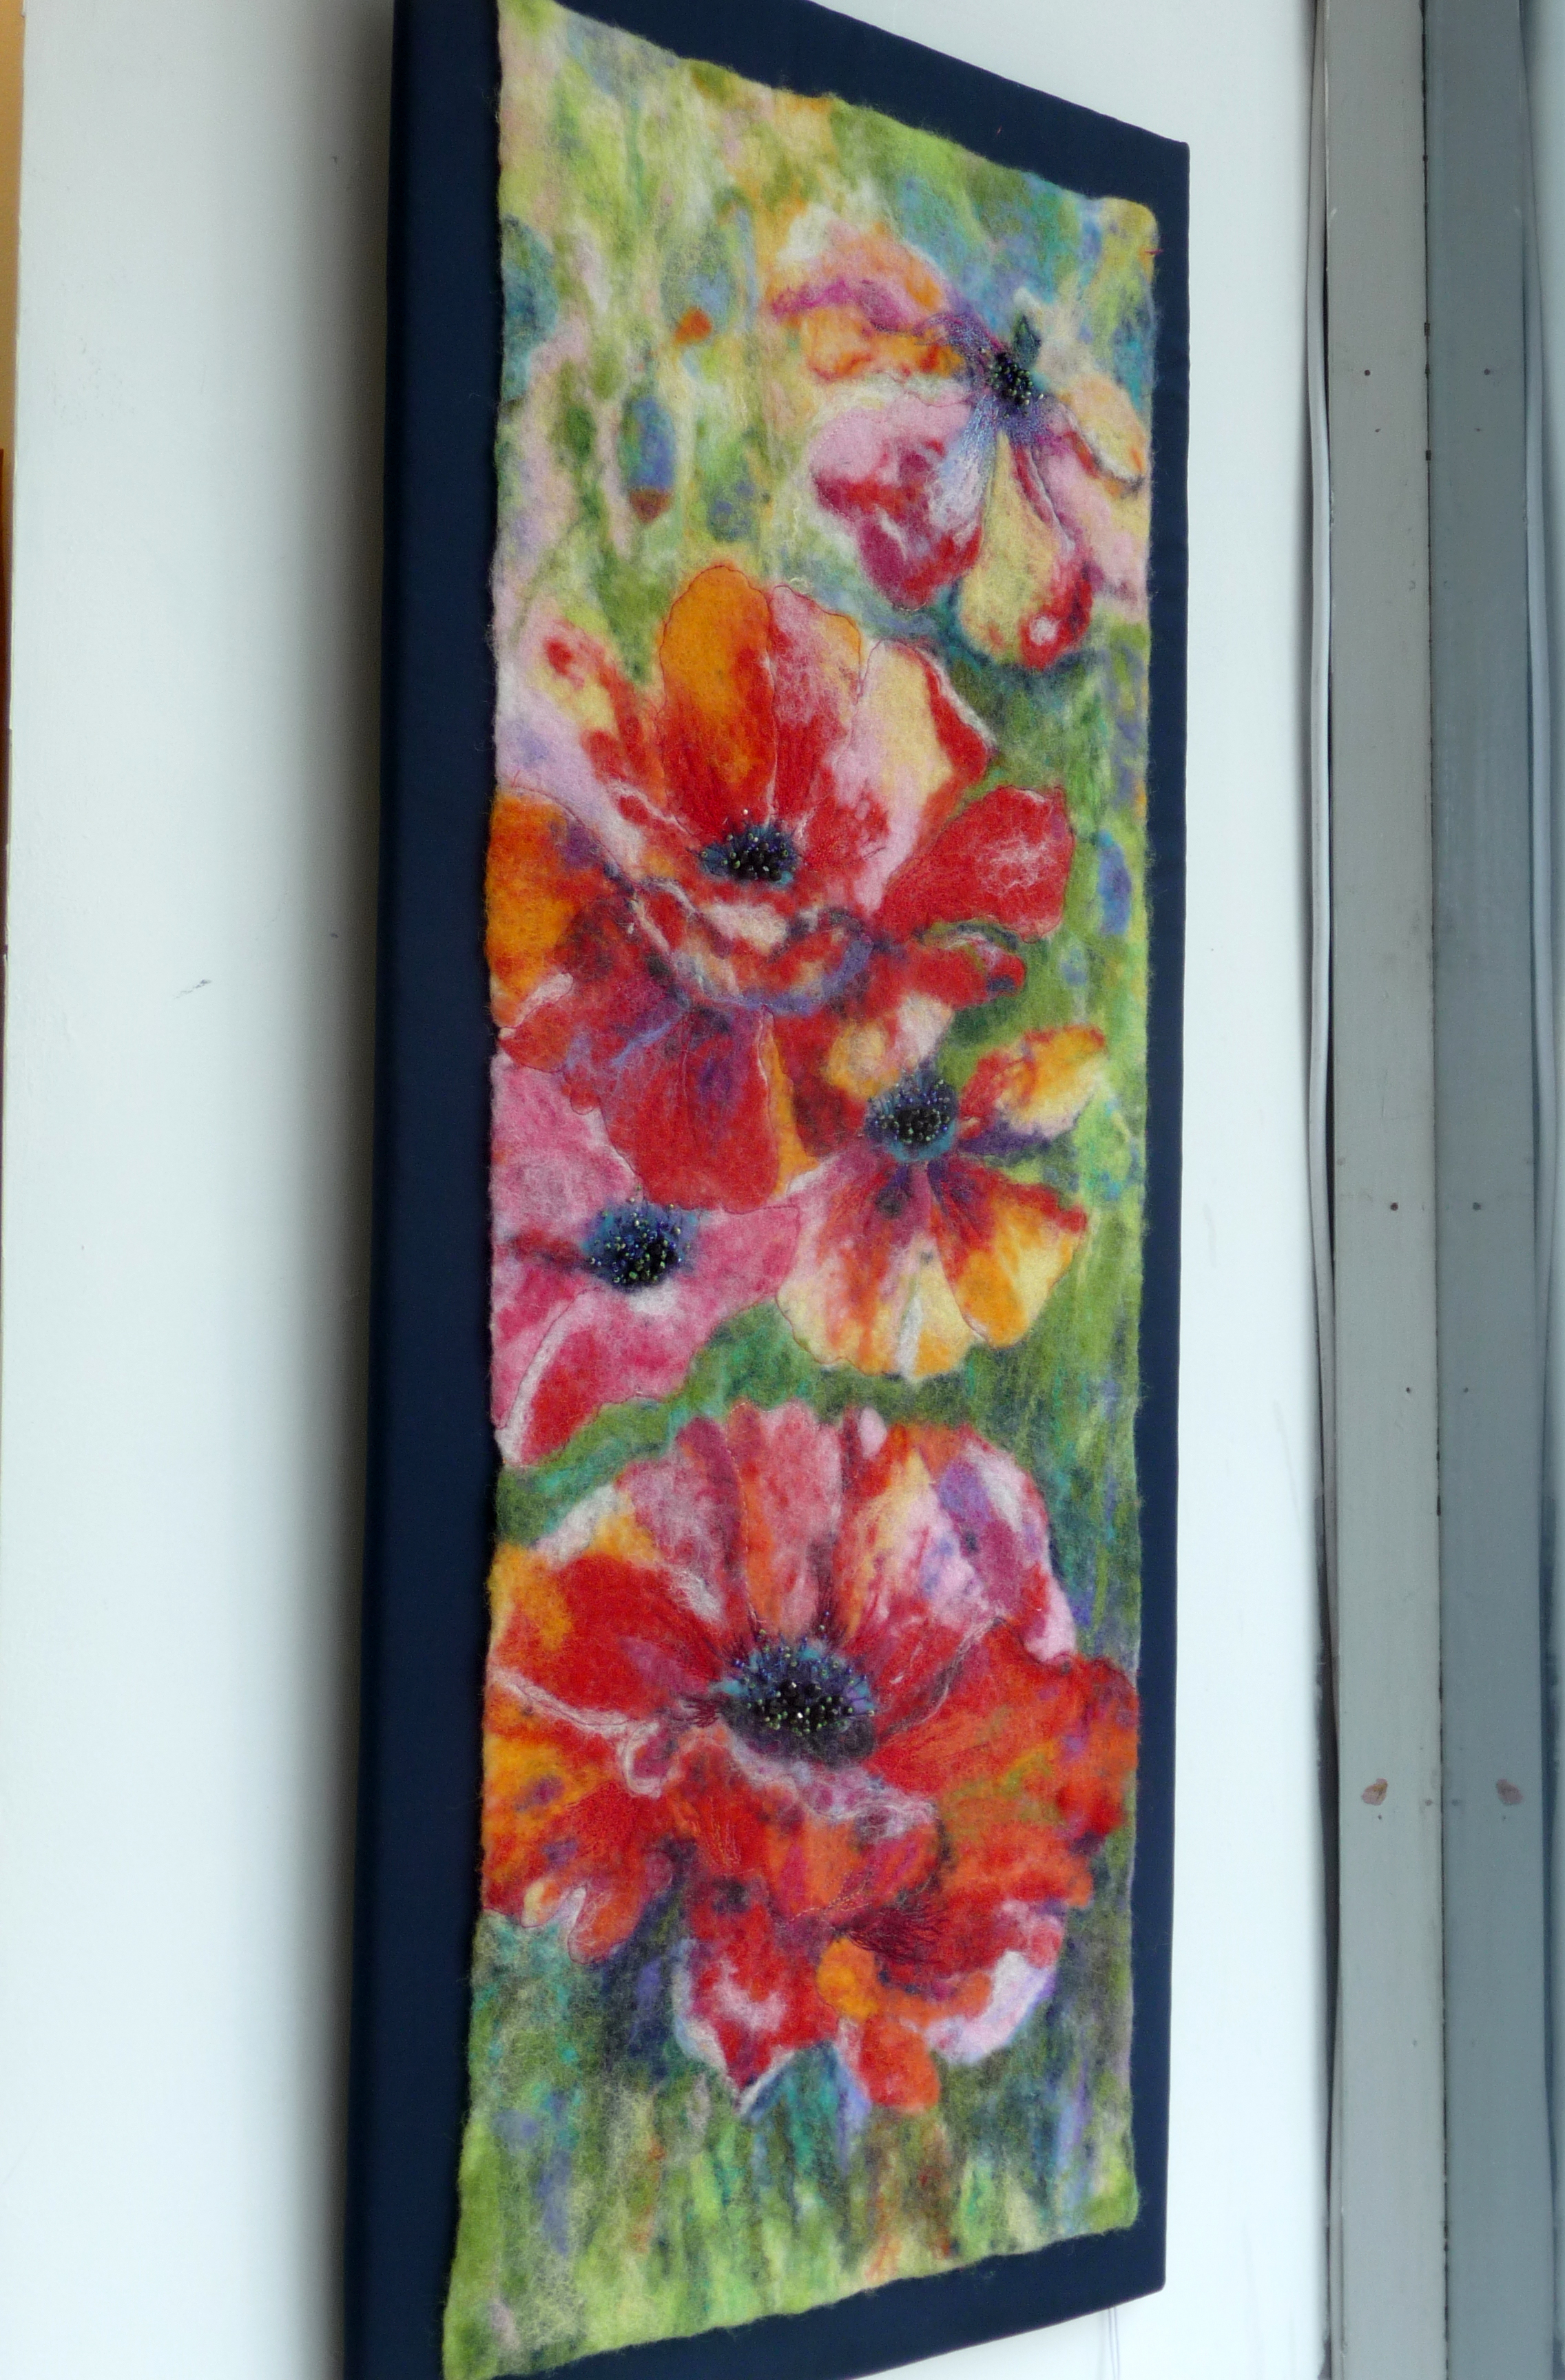 POPPIES by Pat Bean, wet felted hanging with needle felted embellishments